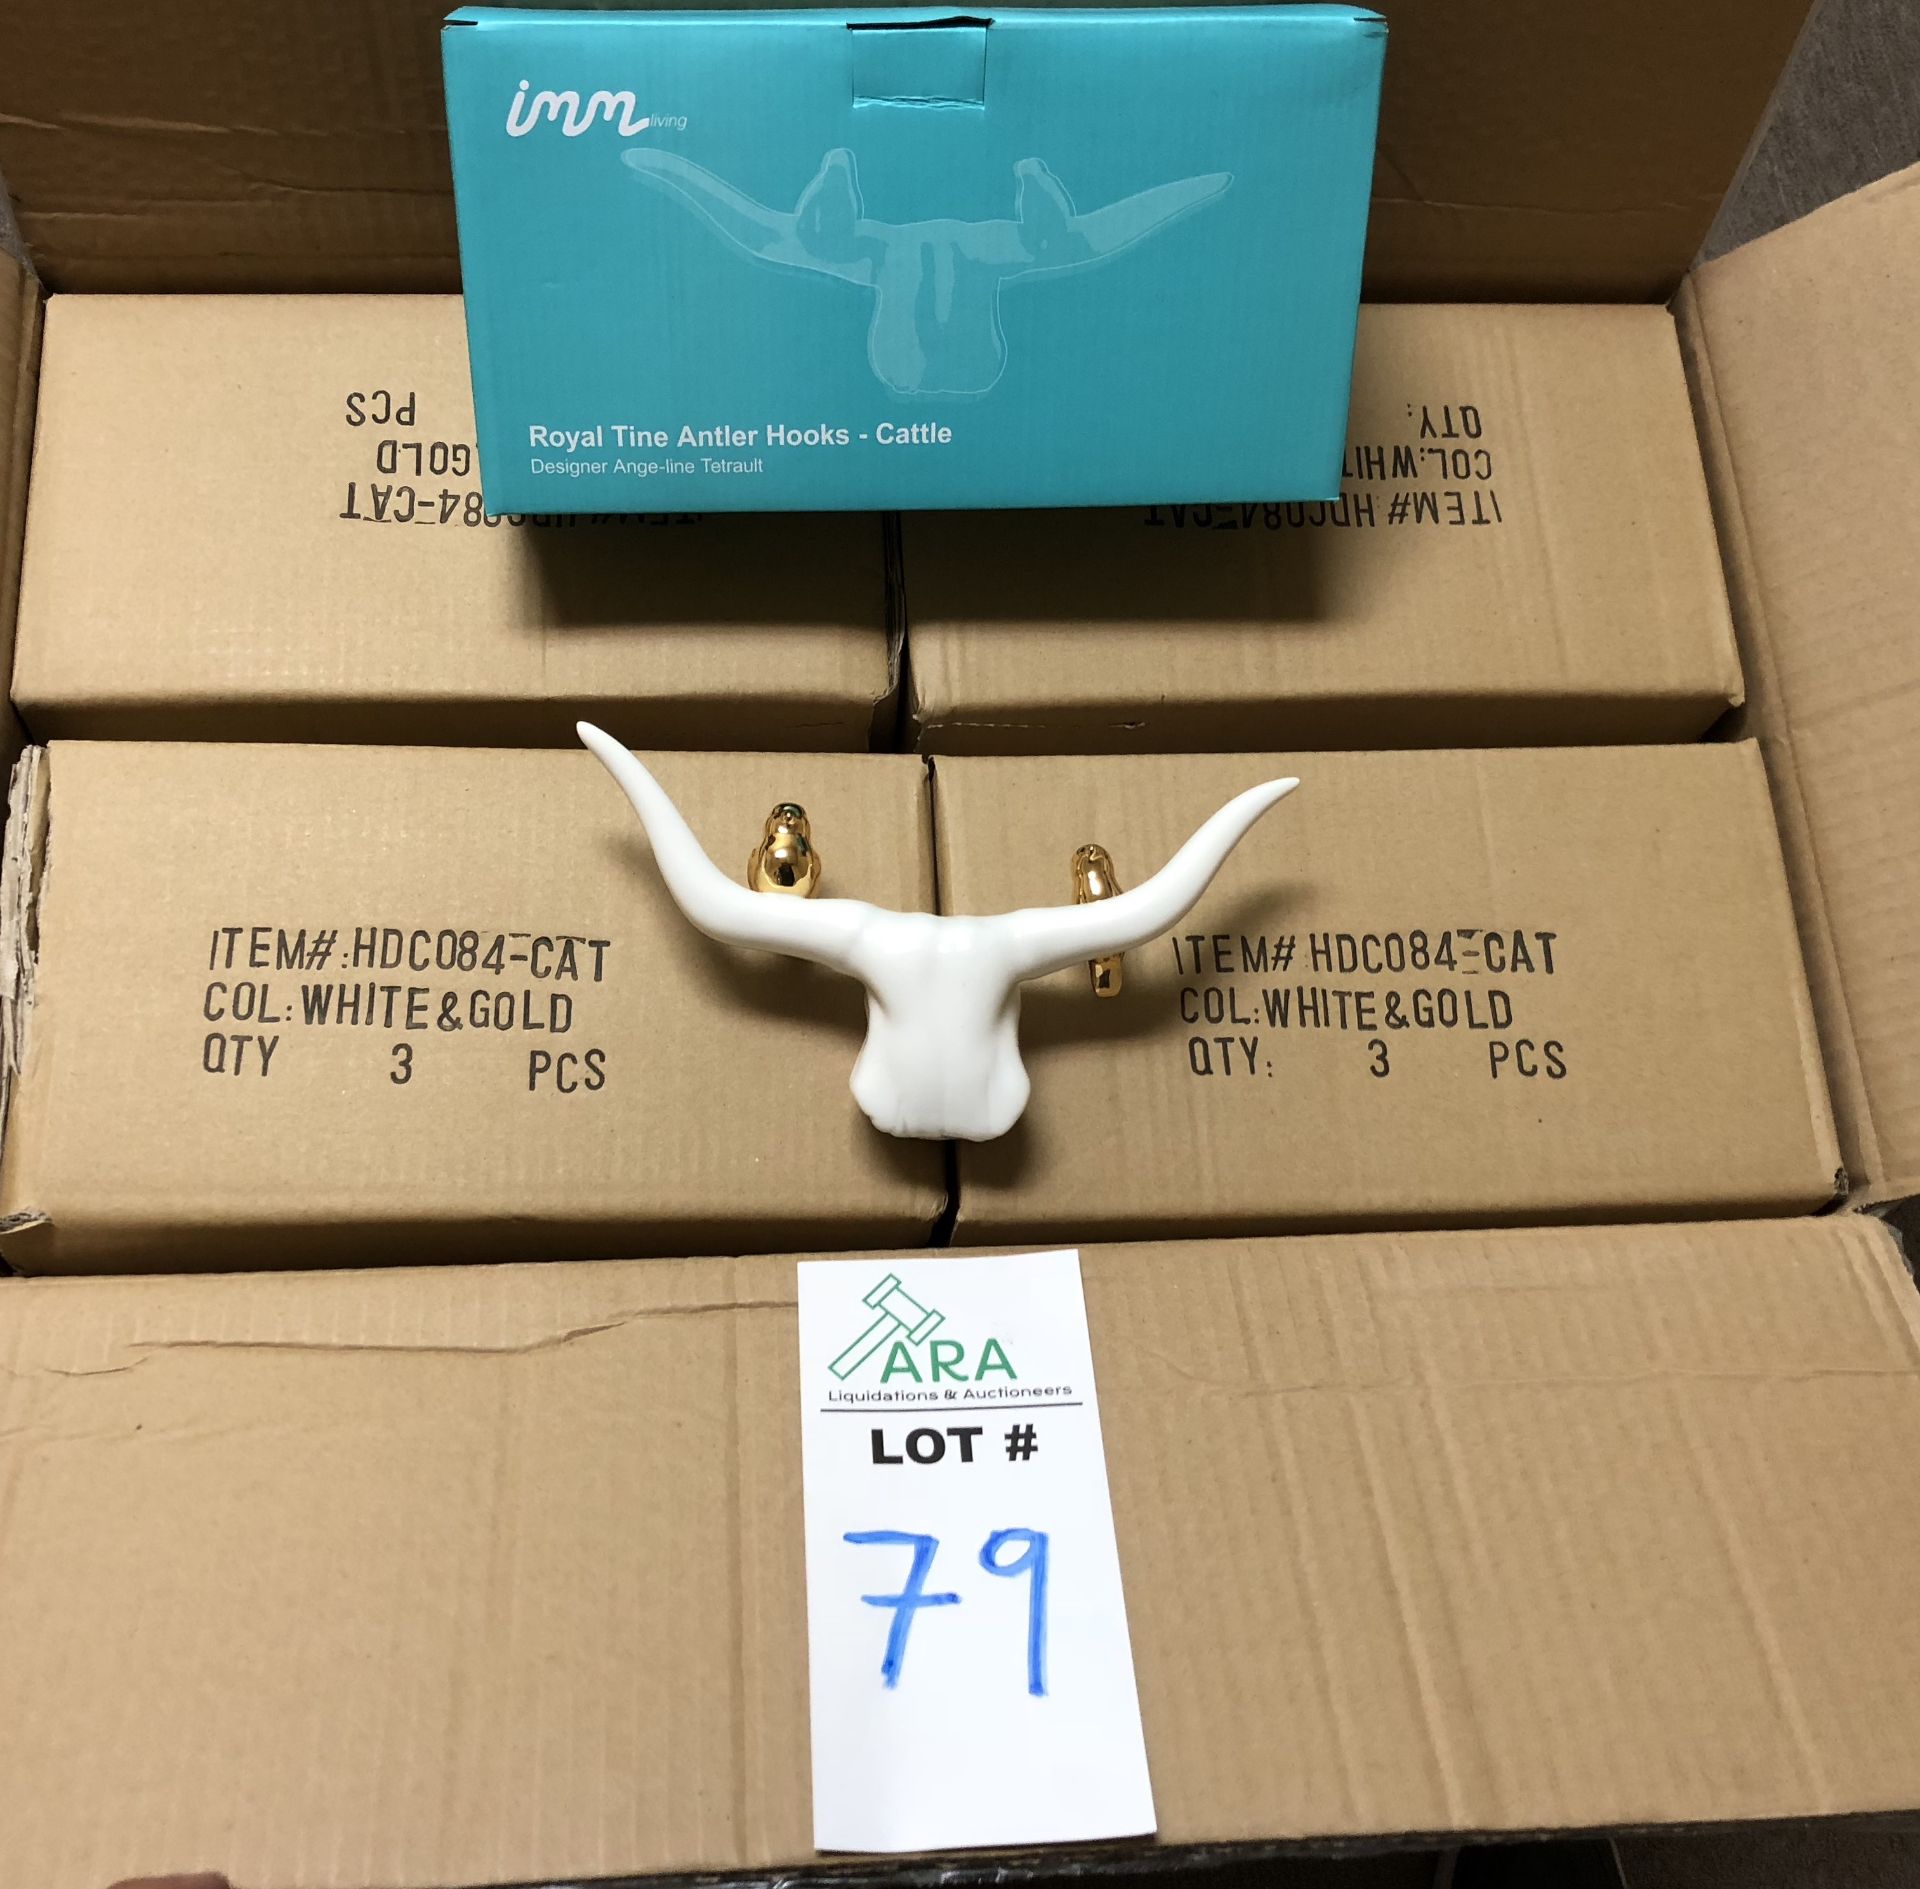 24 PCS CASE PACKED ROYAL TINE ANTLER HEADS - CATTLE RETAIL $39.95 EACH   GREAT FOR RESALE DURING